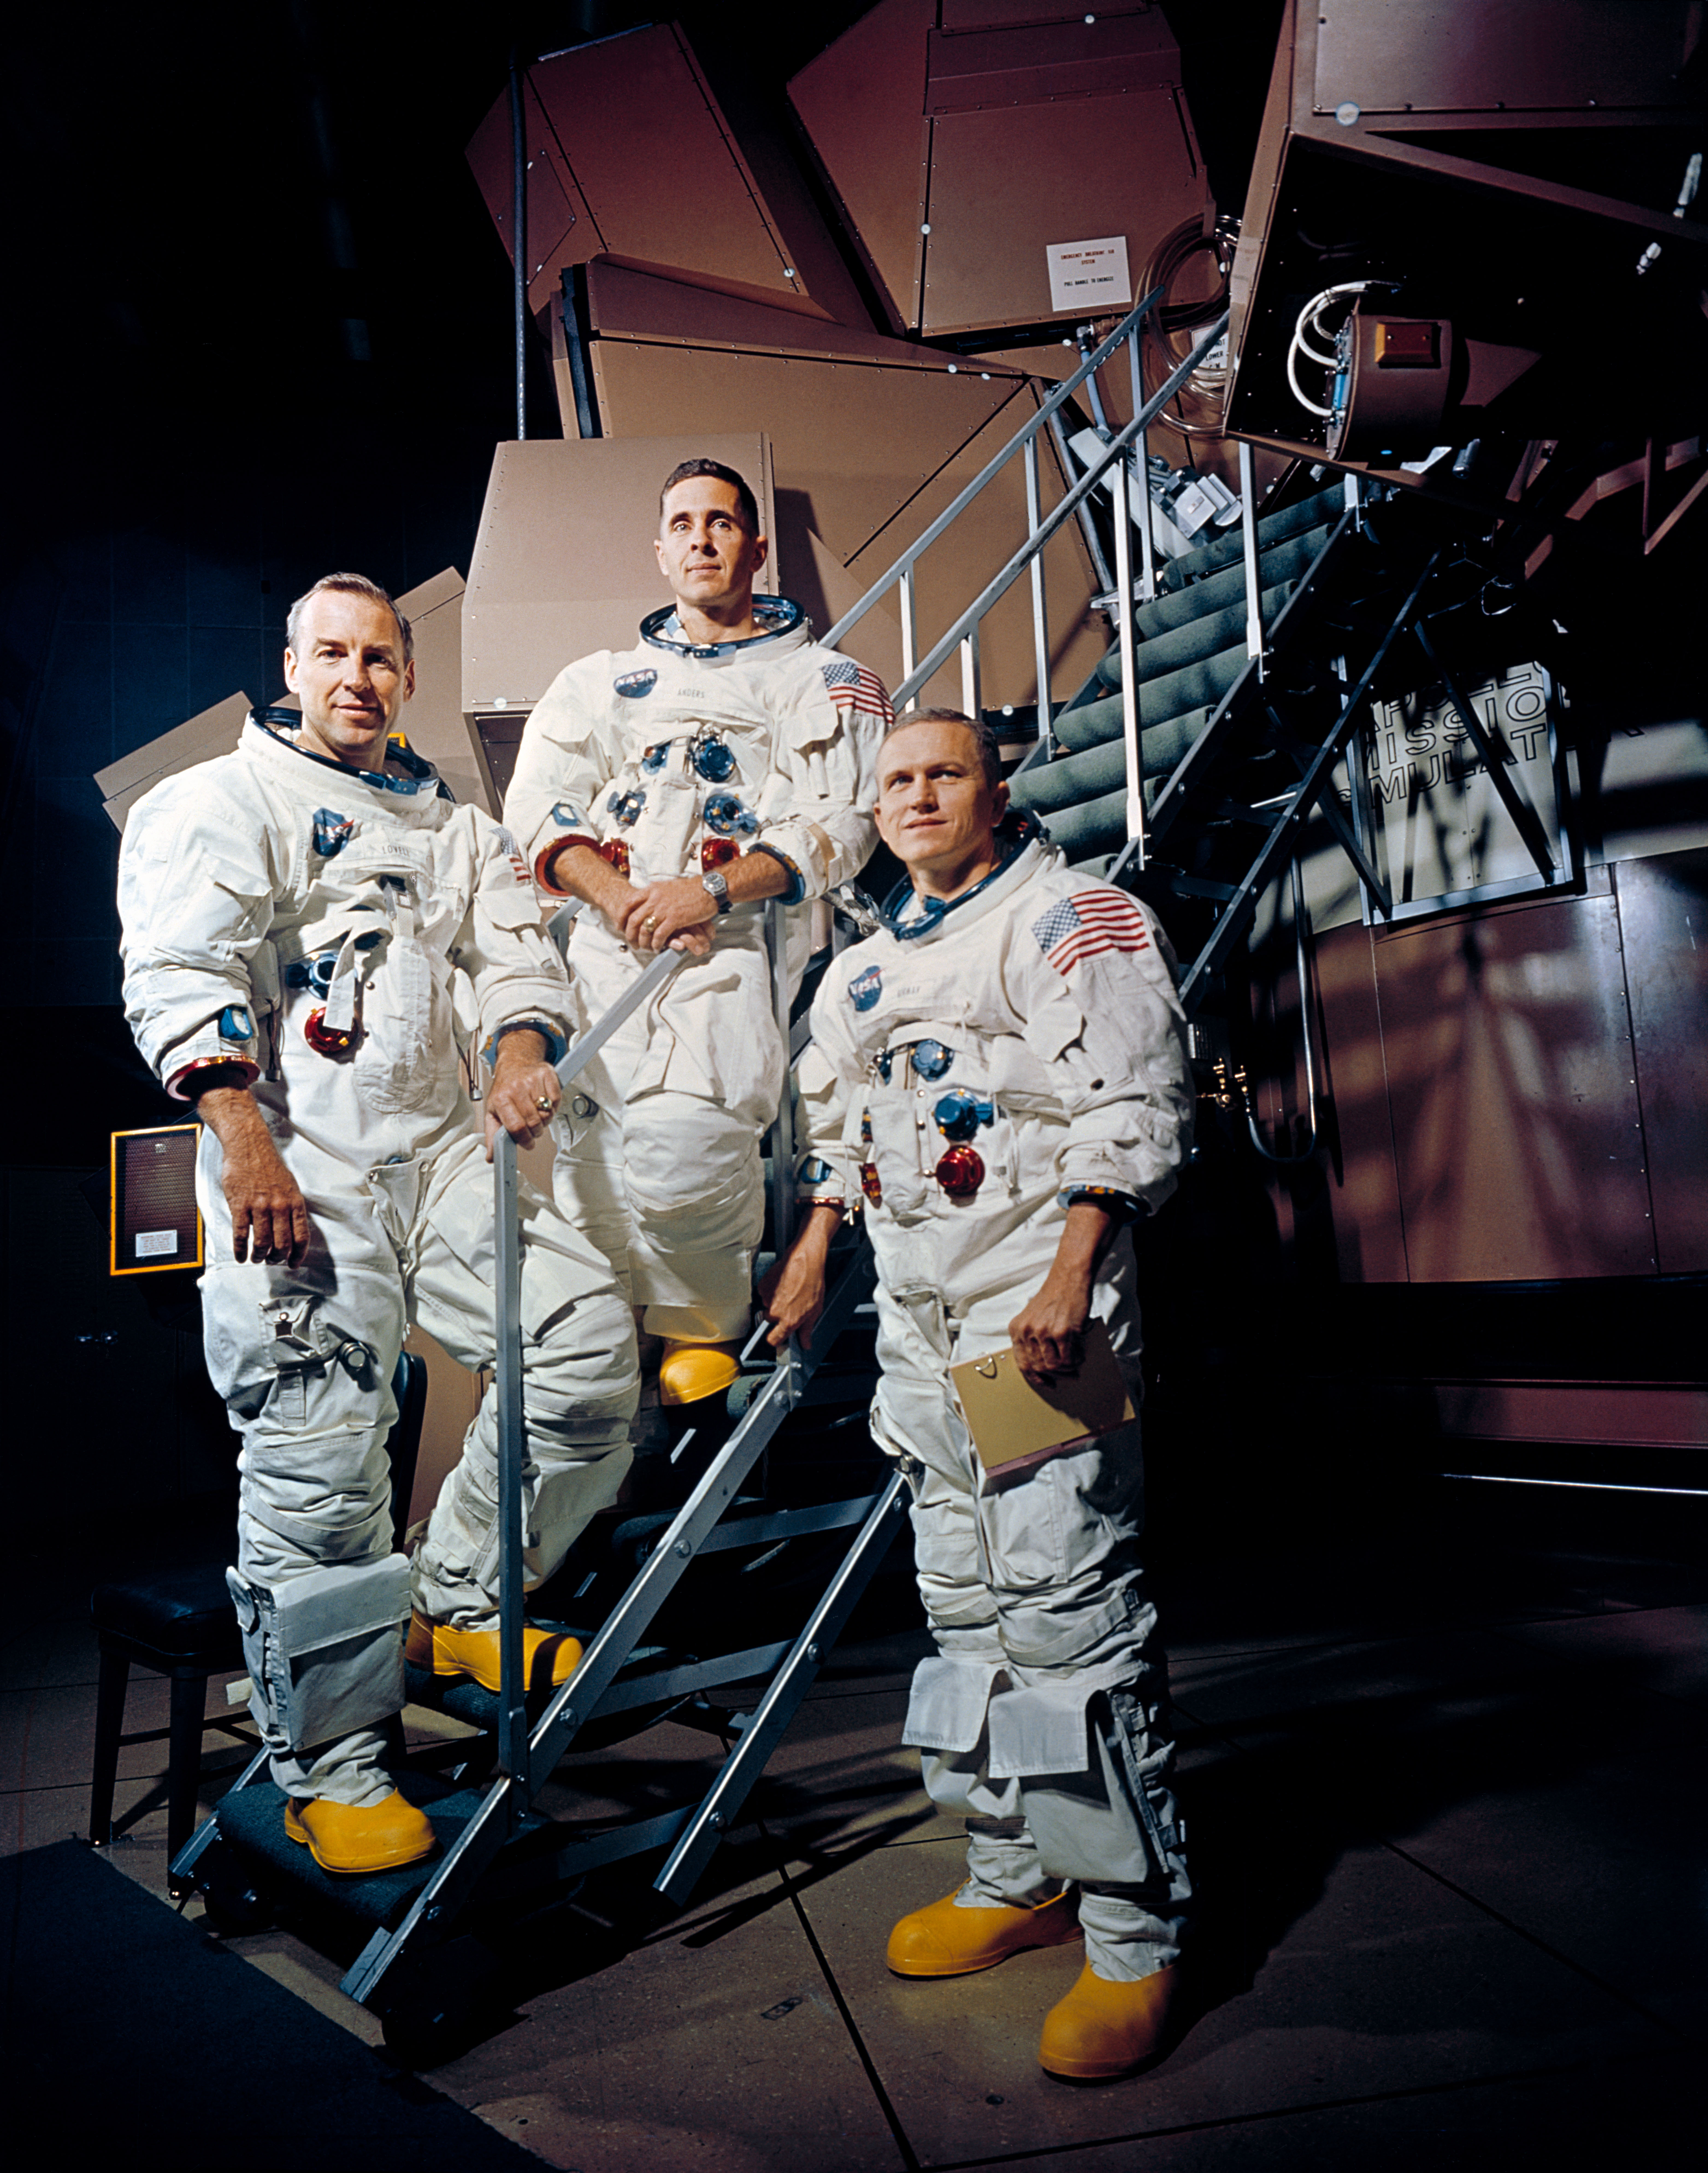 Apollo 8 crew is photographed posing on a Kennedy Space Center (KSC) simulator in their space suits. From left to right are: James A. Lovell Jr., William A. Anders, and Frank Borman. Photo taken on November 22, 1968.